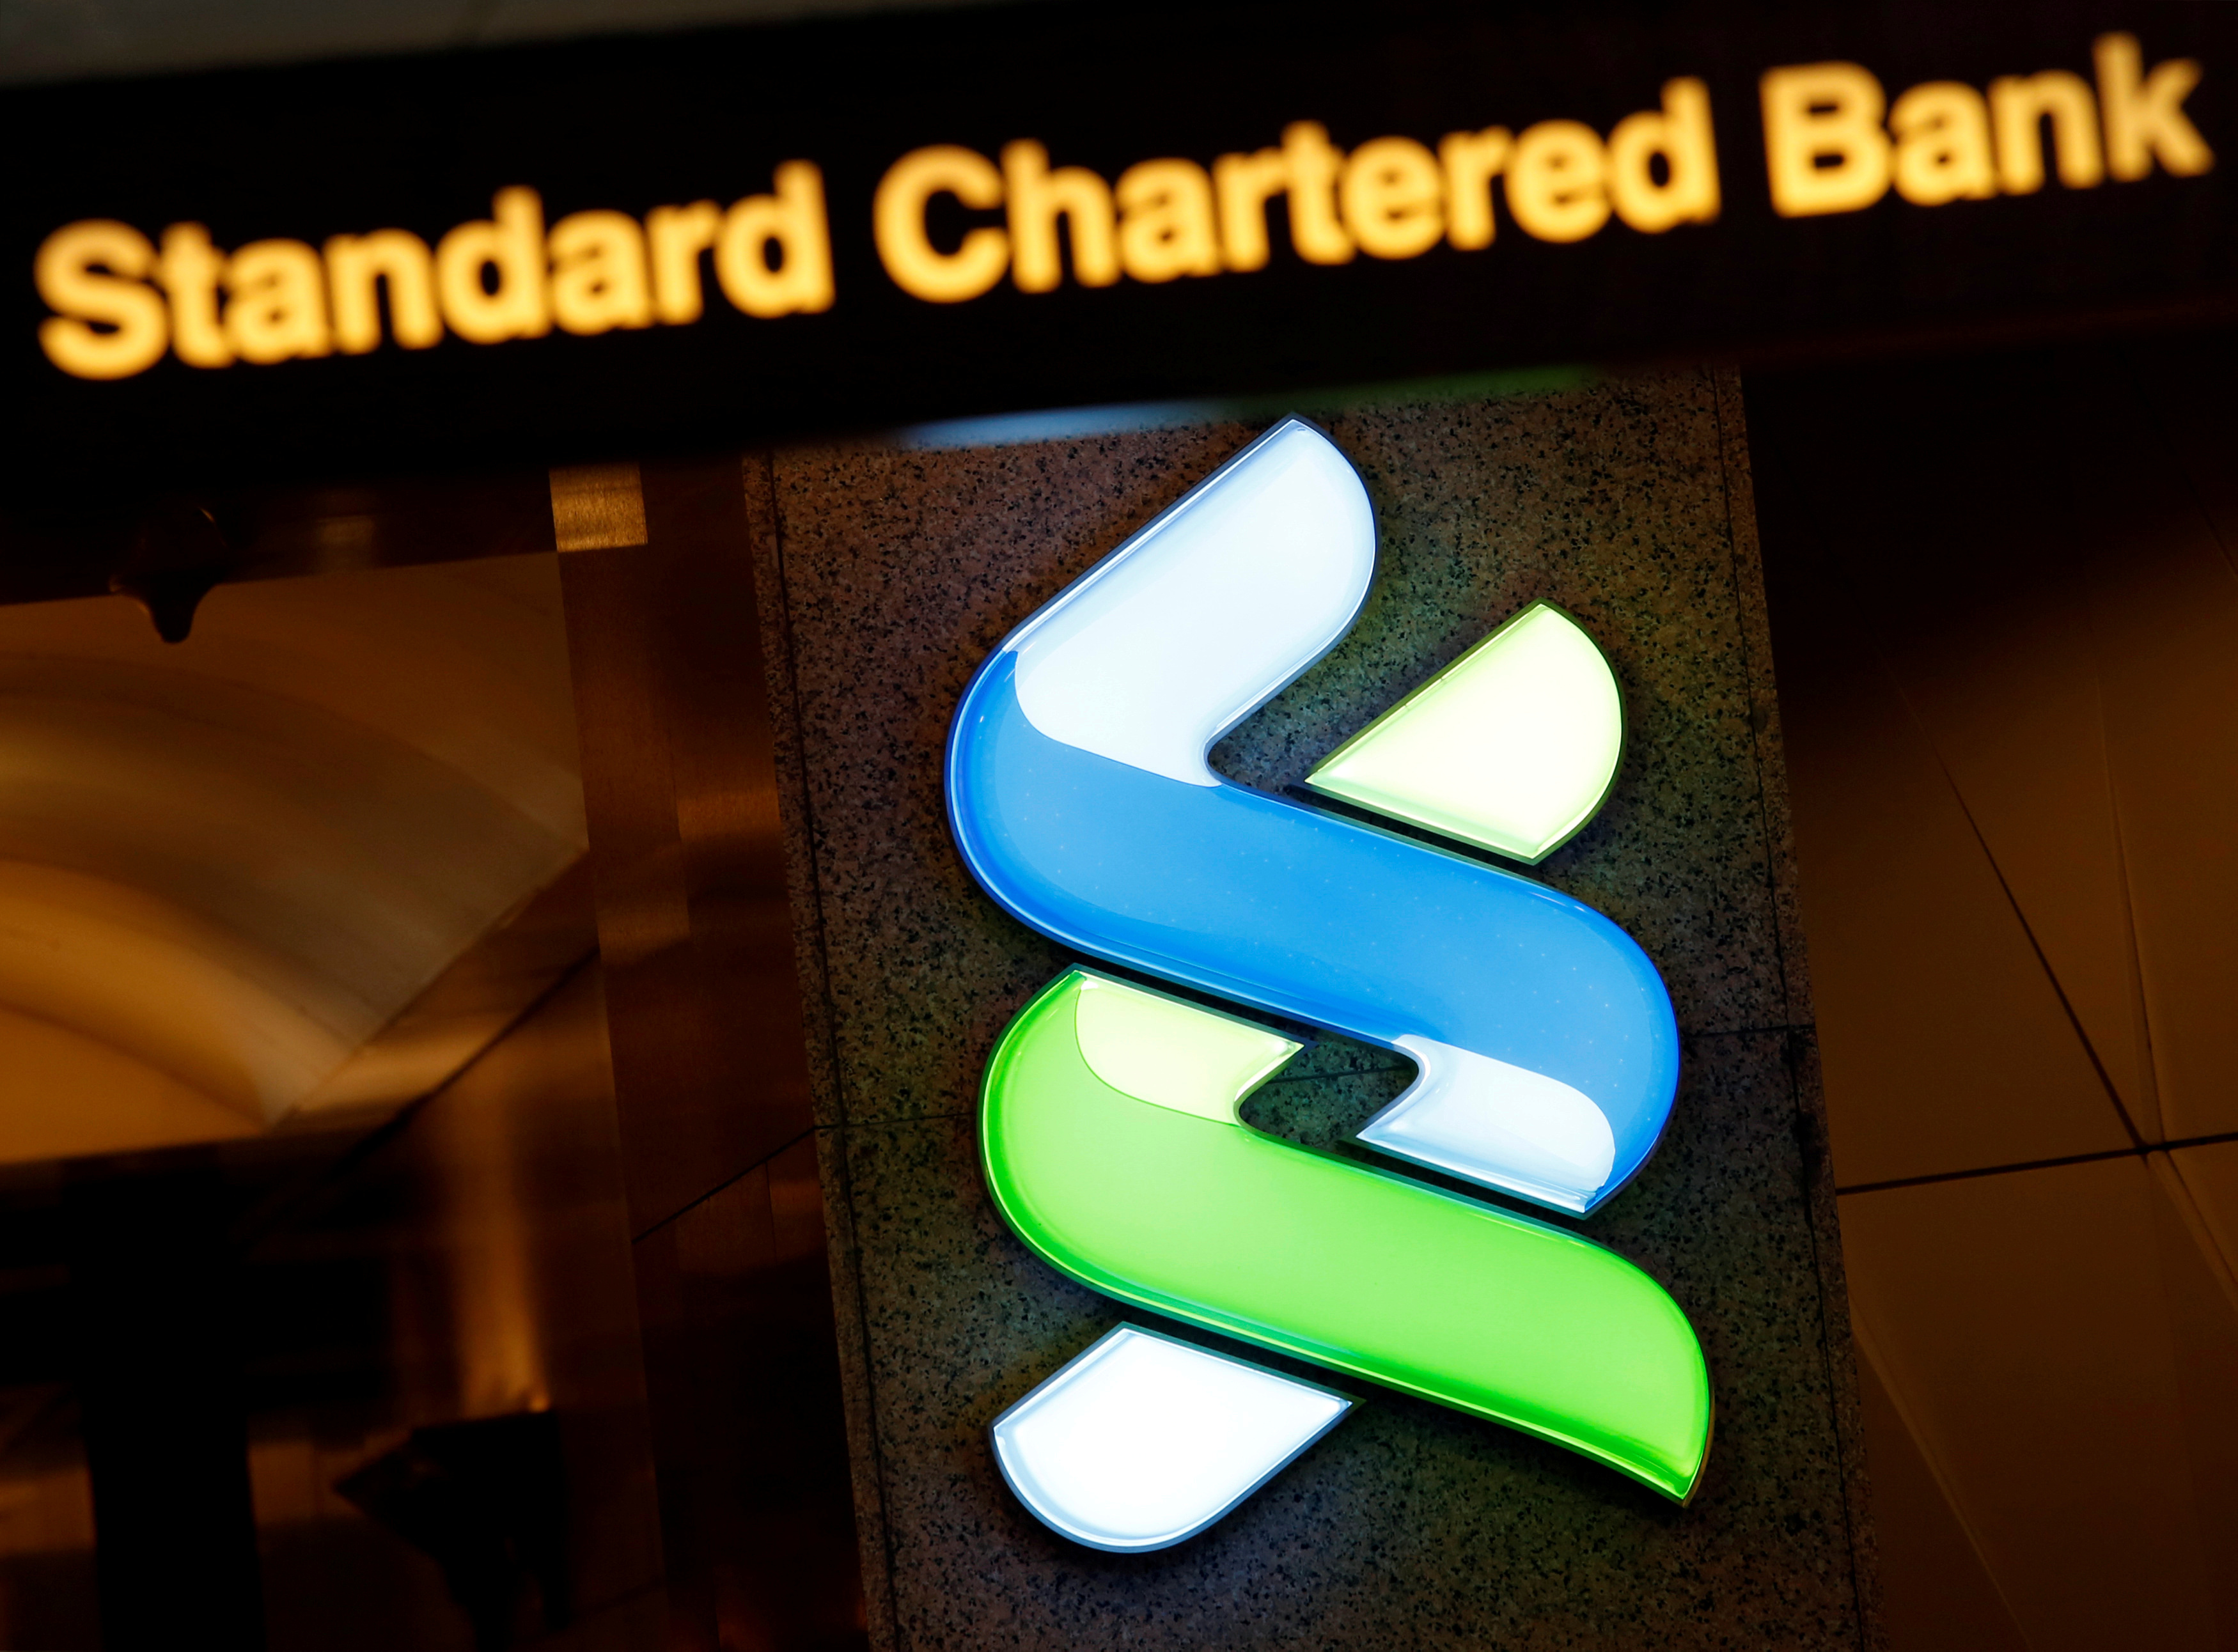 Standard Chartered Hk Says It Has Qualified As Direct Cips Offshore Participant Reuters